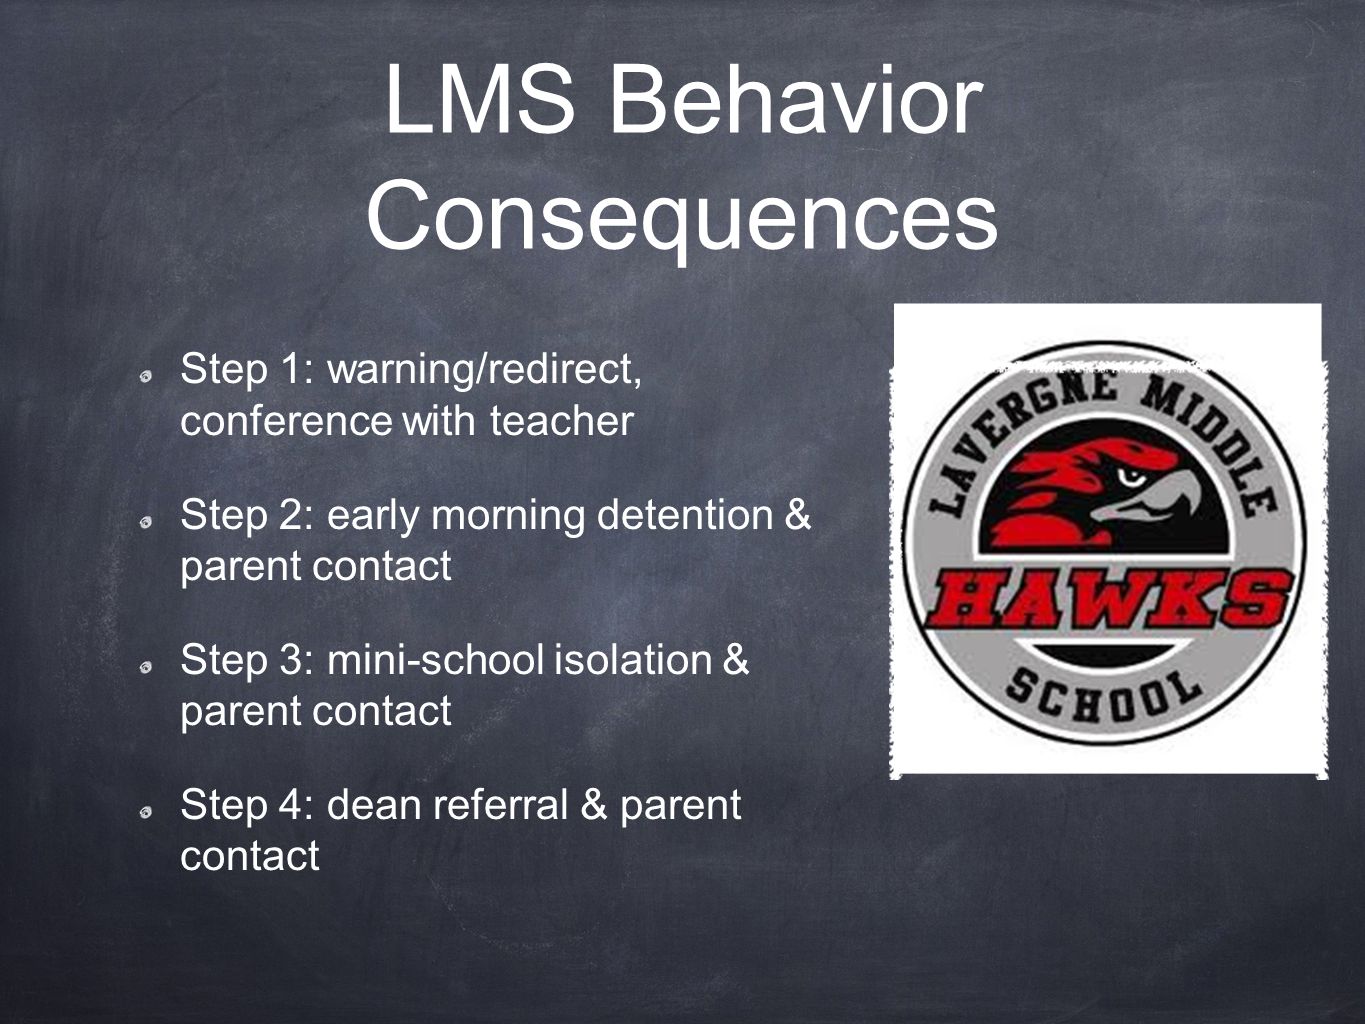 LMS Behavior Consequences Step 1: warning/redirect, conference with teacher Step 2: early morning detention & parent contact Step 3: mini-school isolation & parent contact Step 4: dean referral & parent contact